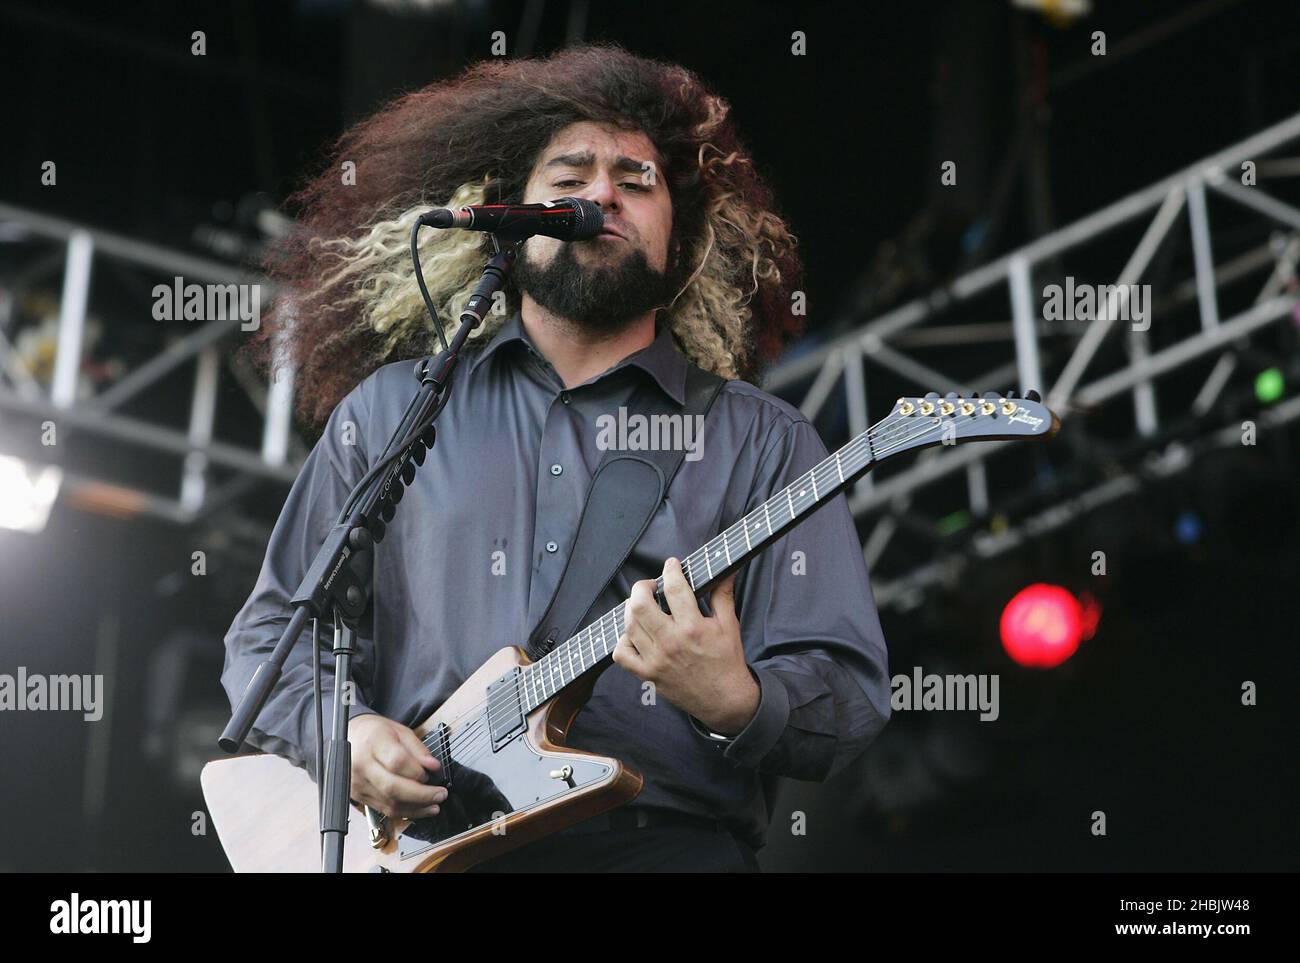 Coheed and Cambria performing. Stock Photo